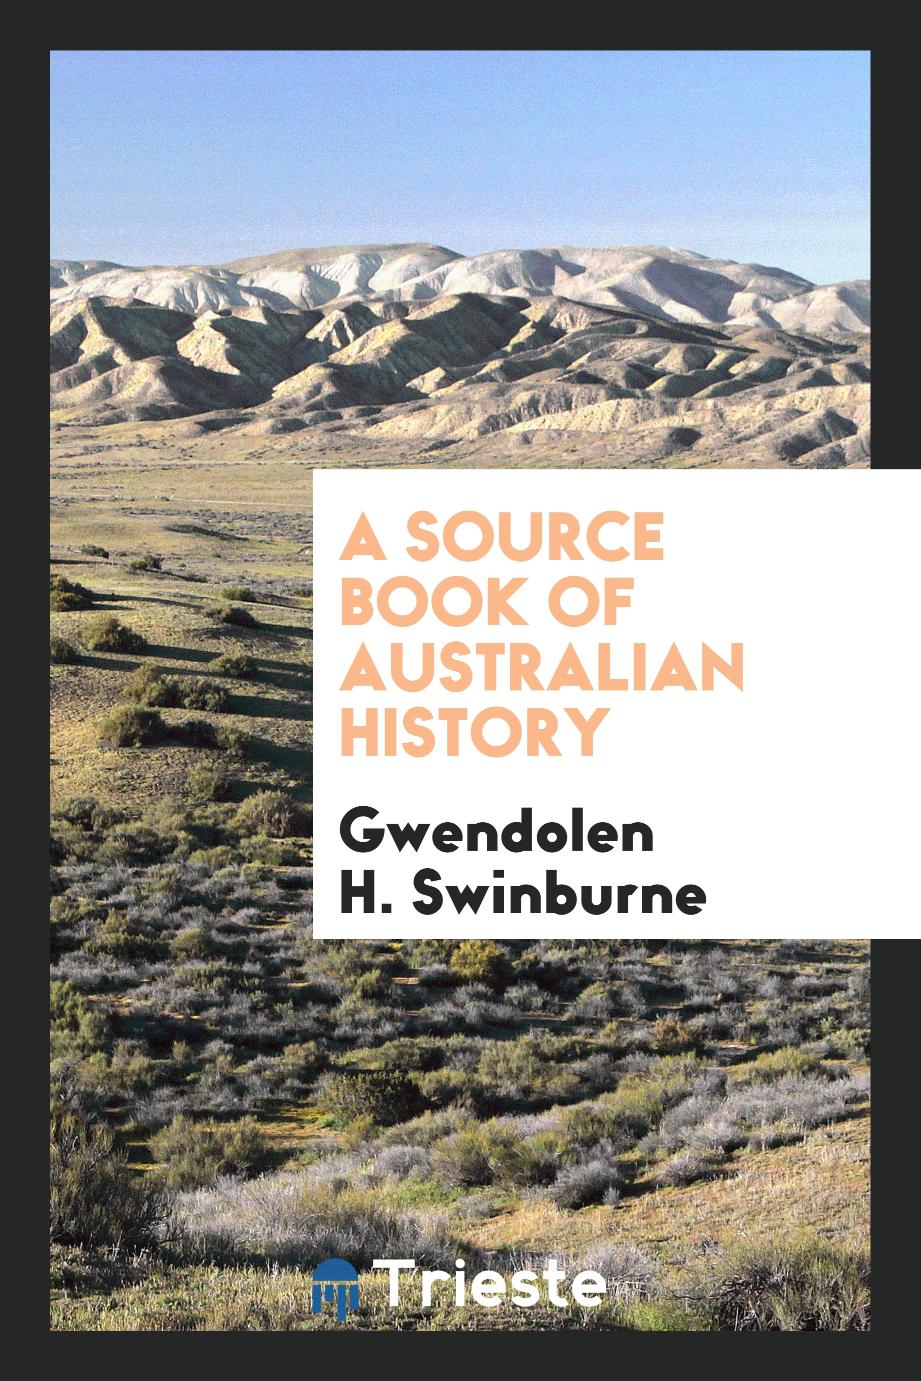 A source book of Australian history